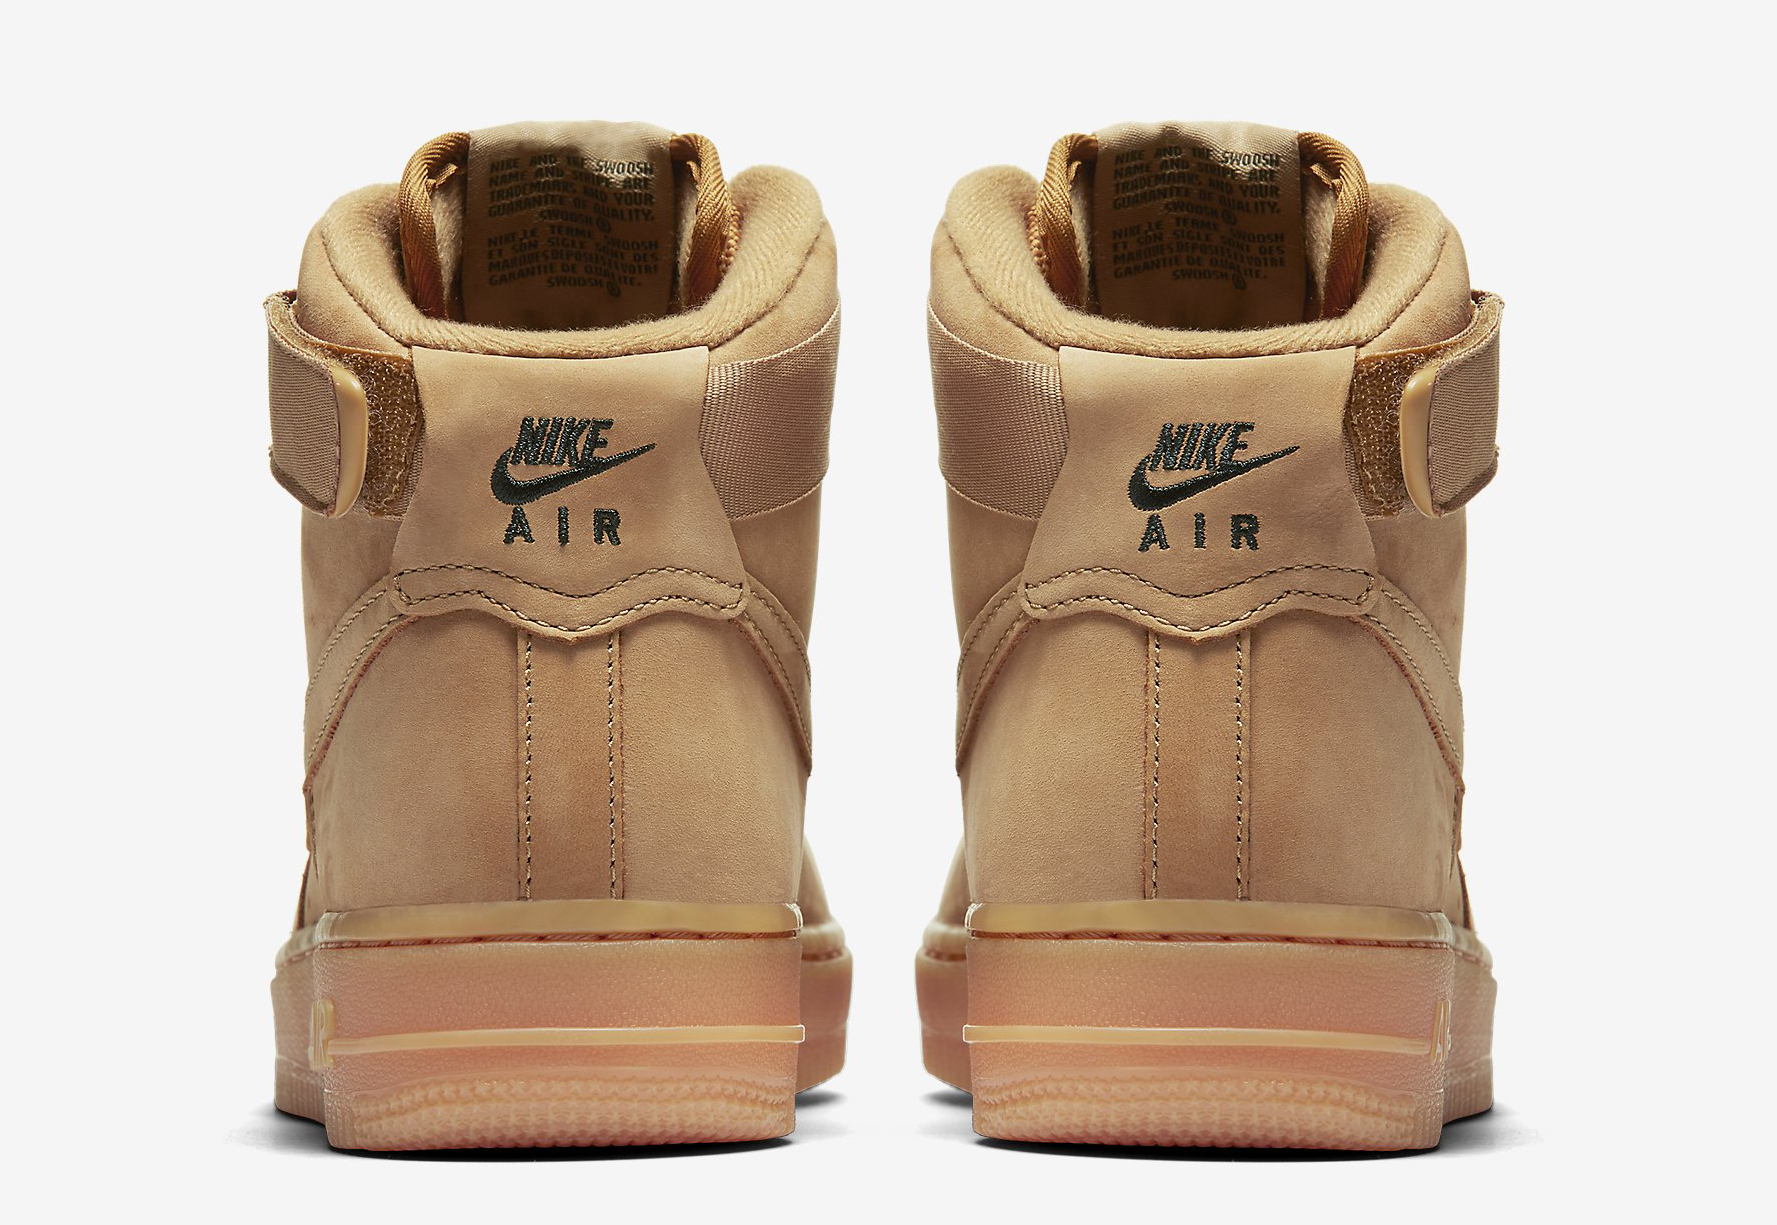 The Nike Air Force 1 High Flax Releases In November